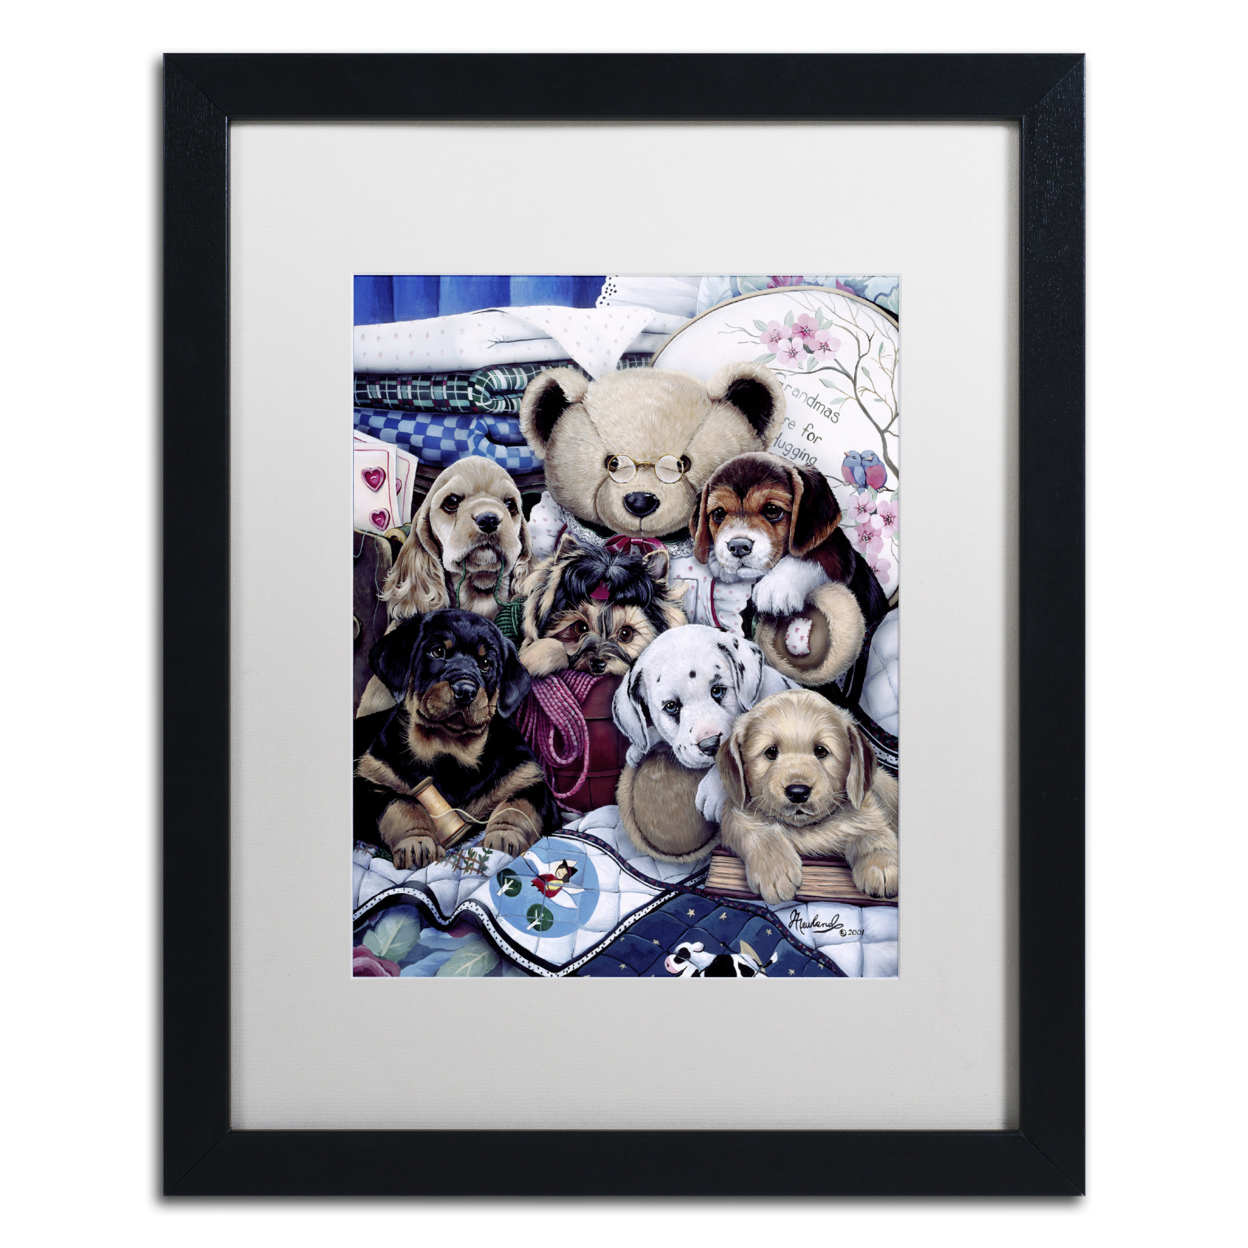 Jenny Newland 'Puppy Party' Black Wooden Framed Art 18 X 22 Inches